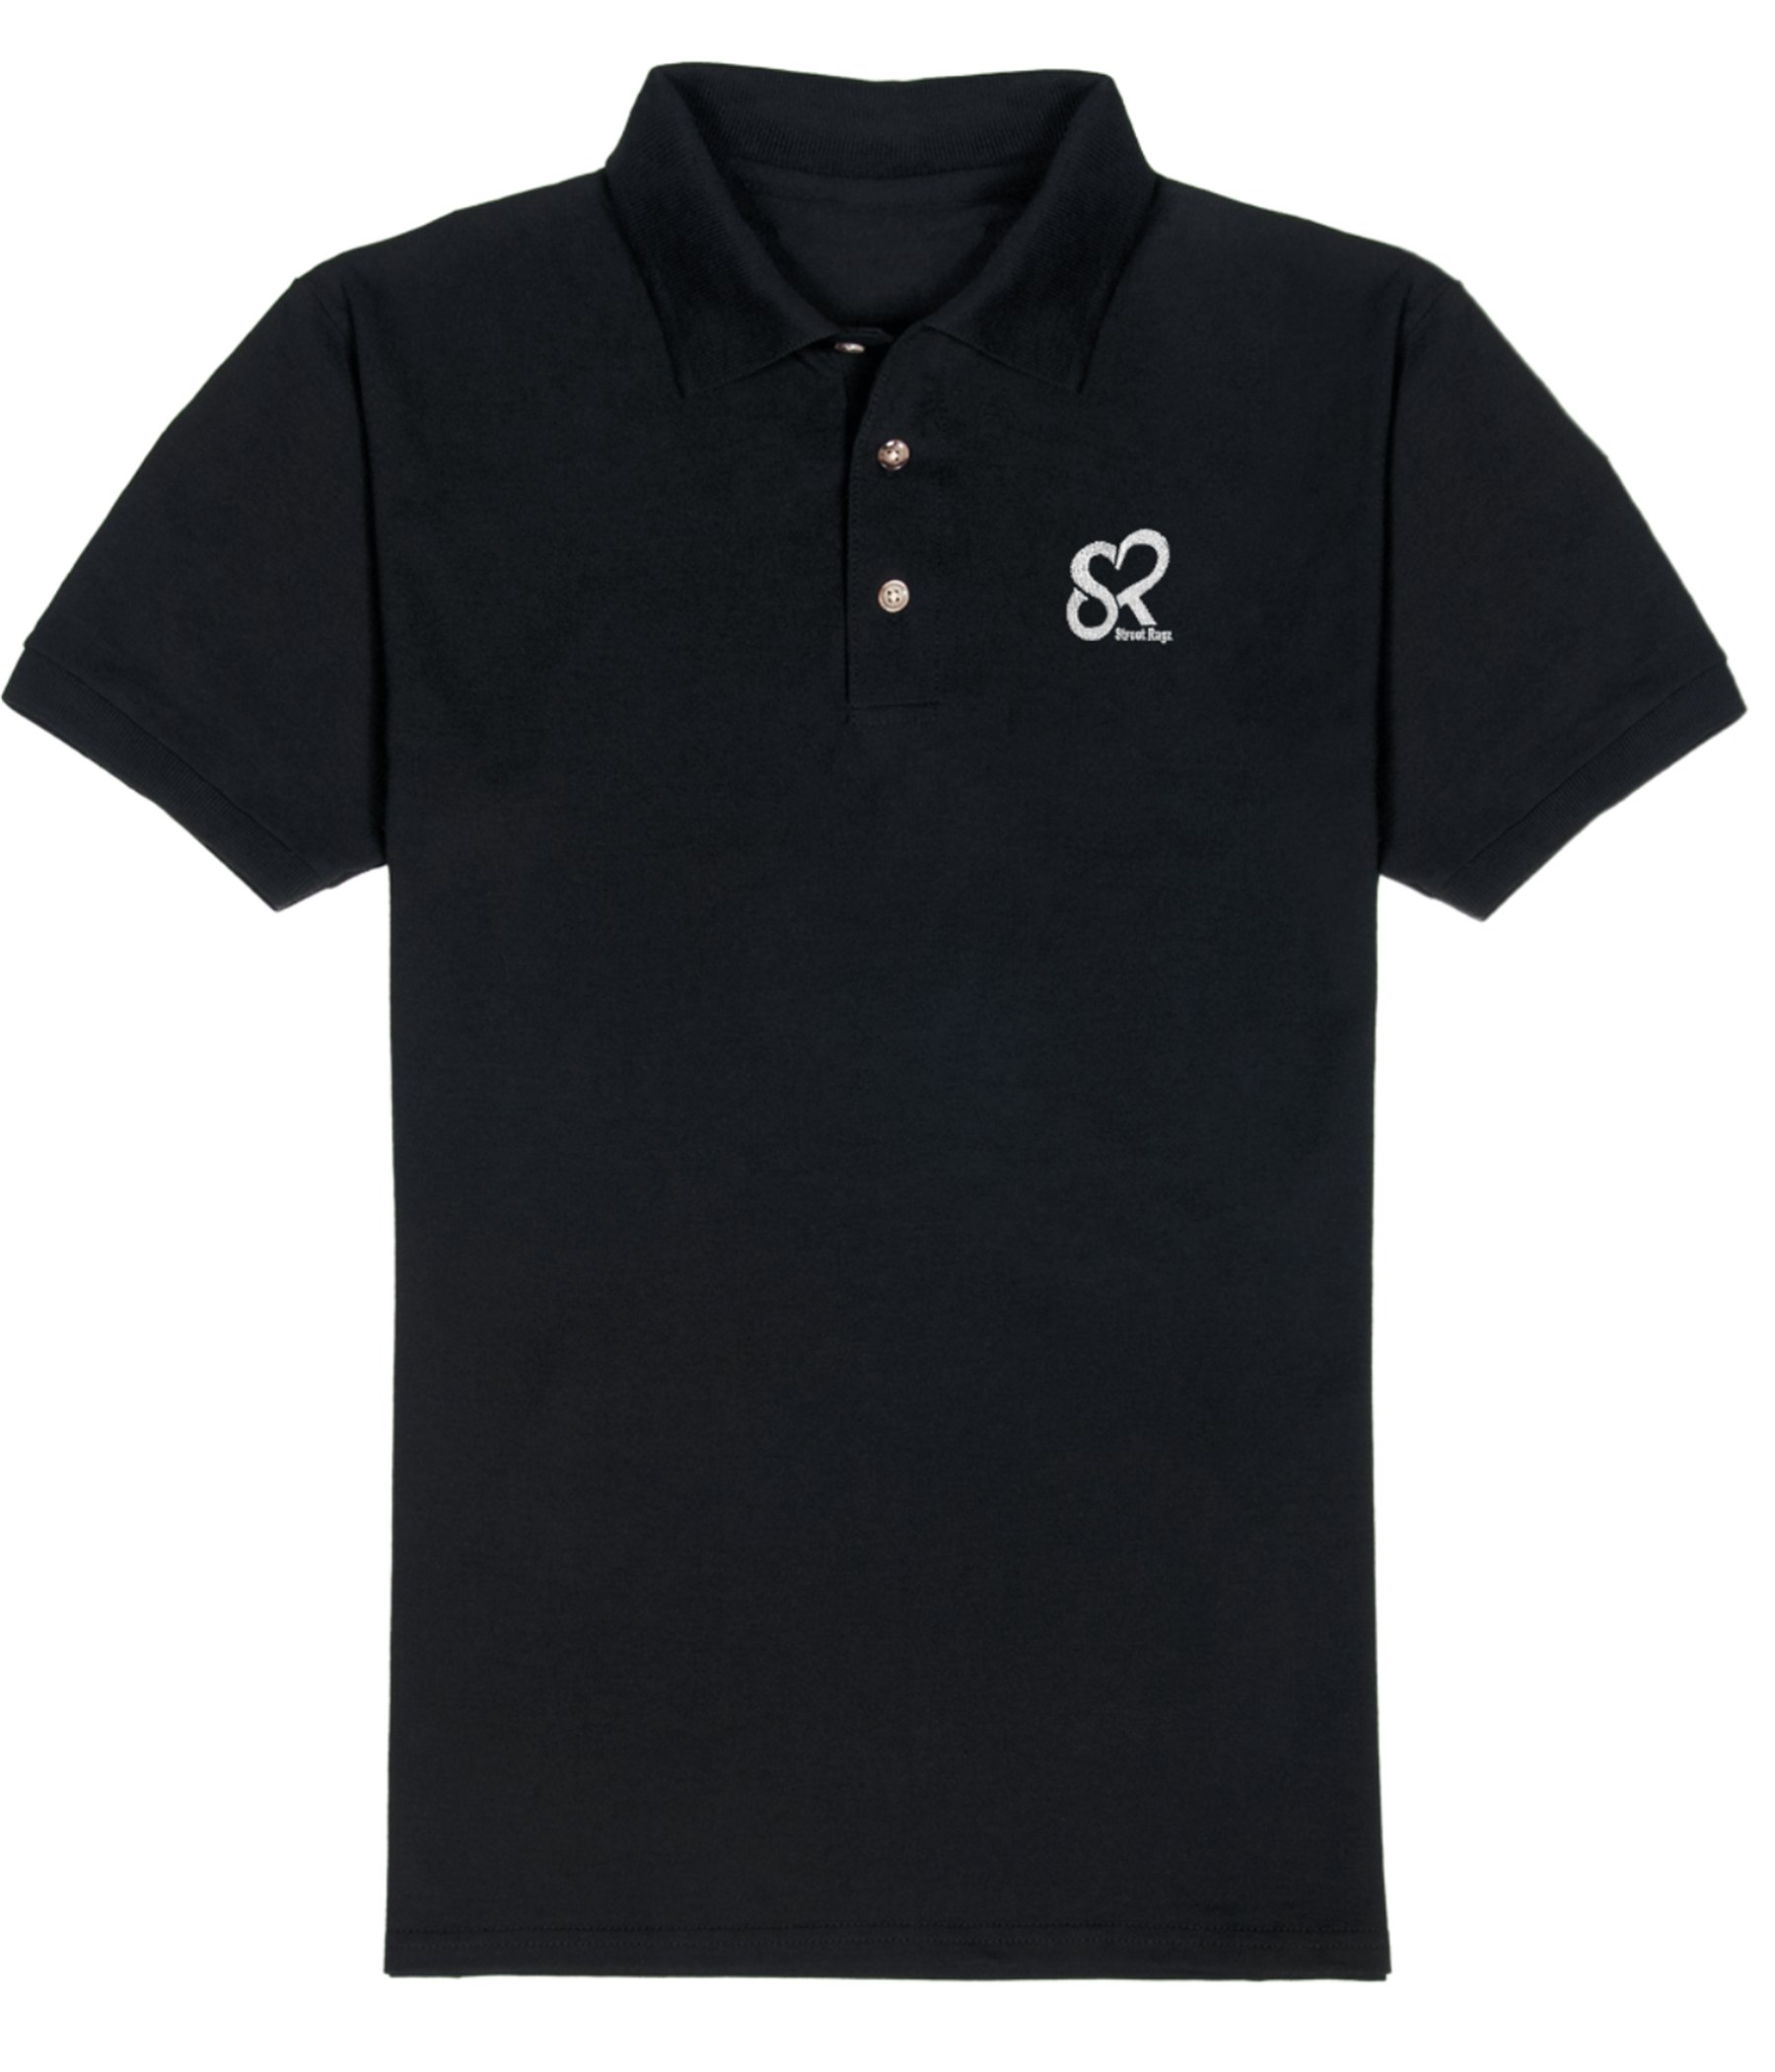 Street Ragz White Logo Male Black Shirt, Garments. It is always Summer some place on the blue marble